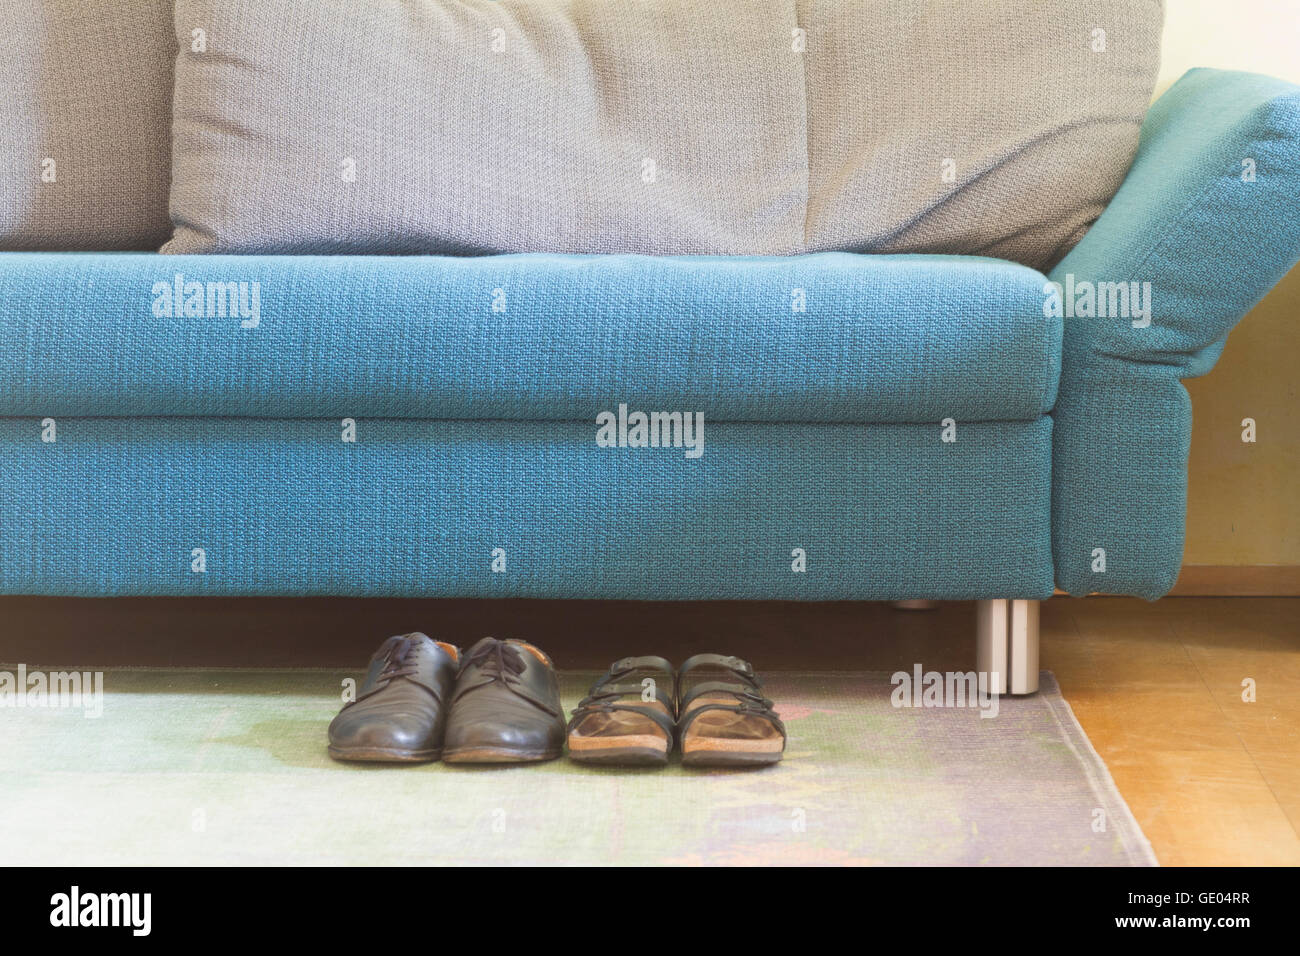 Sofa in living room with shoes Stock Photo